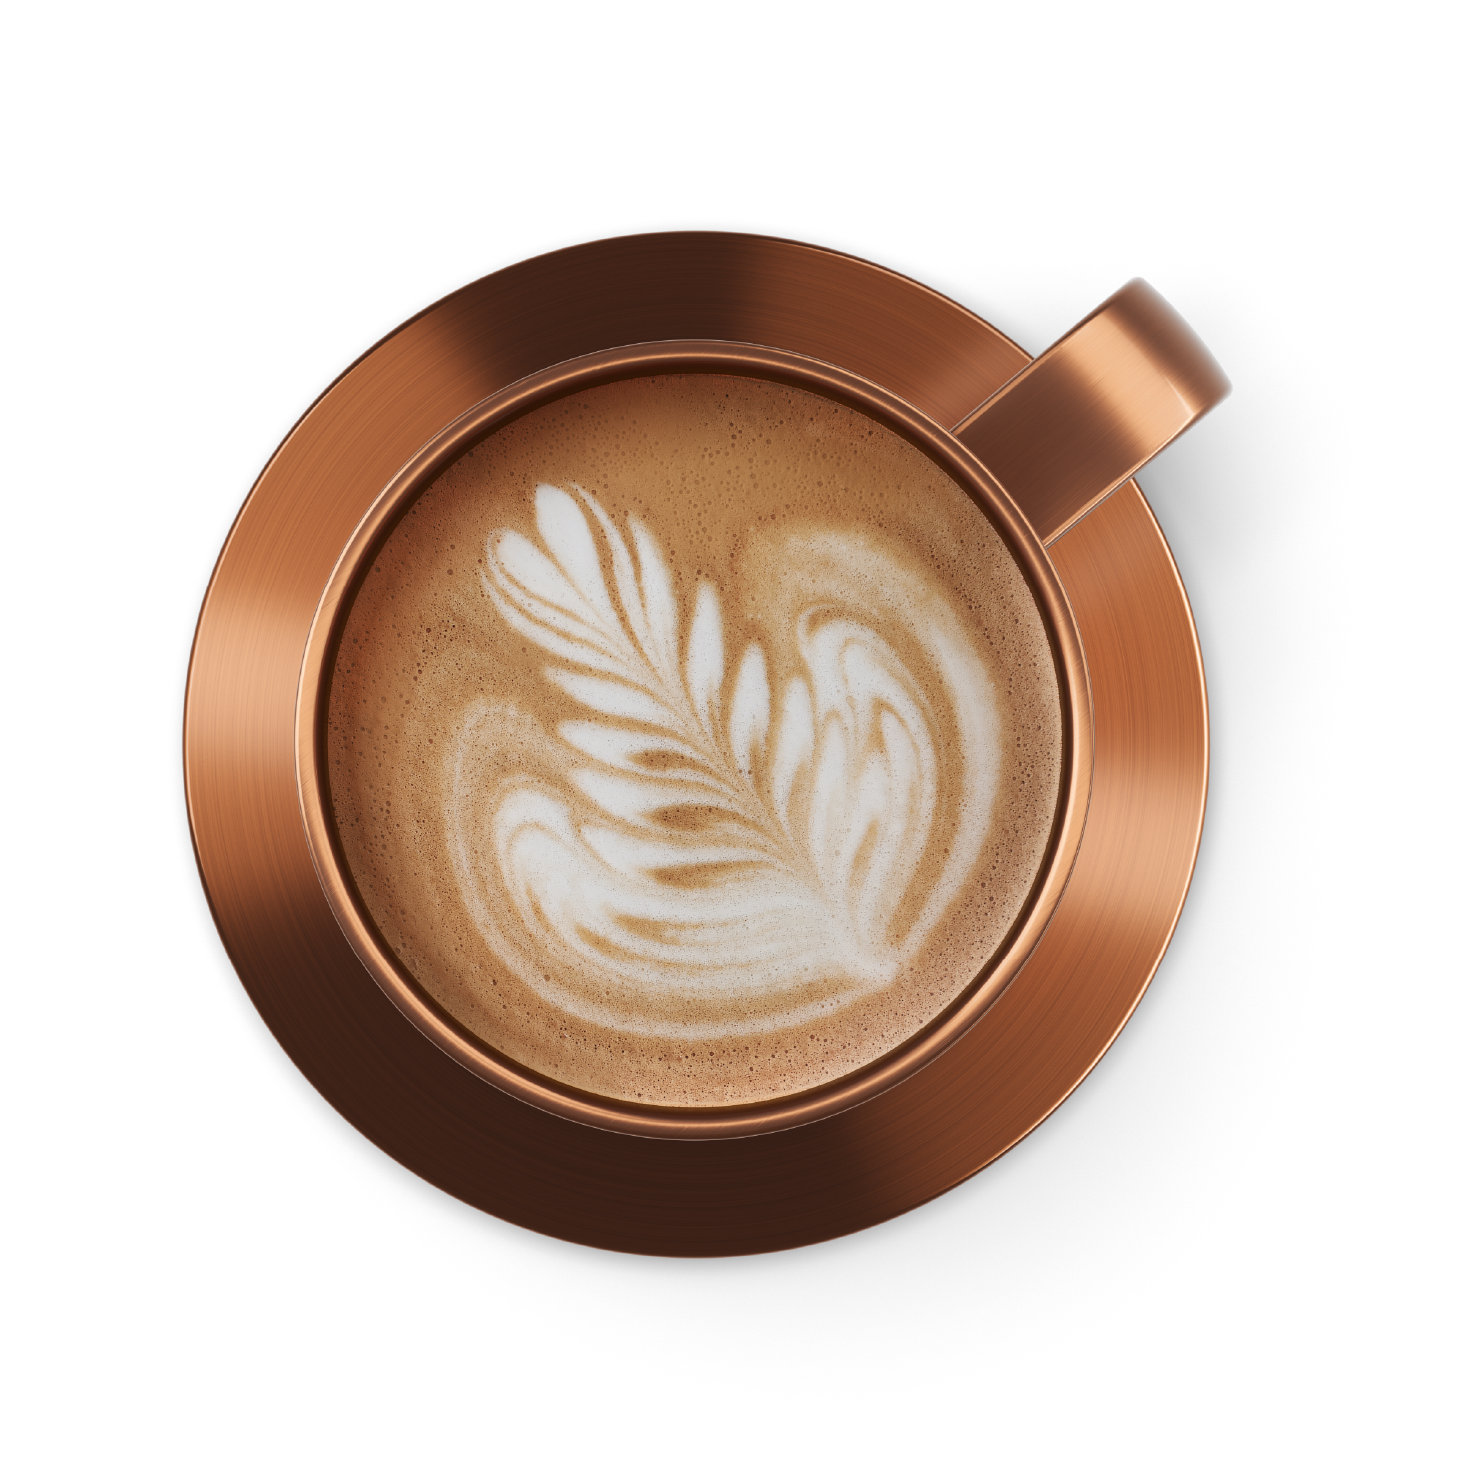 https://cdn.shopify.com/s/files/1/1080/6594/files/The_Best_Way_to_Keep_Your_Coffee_Hot-02.png?v=1649780793